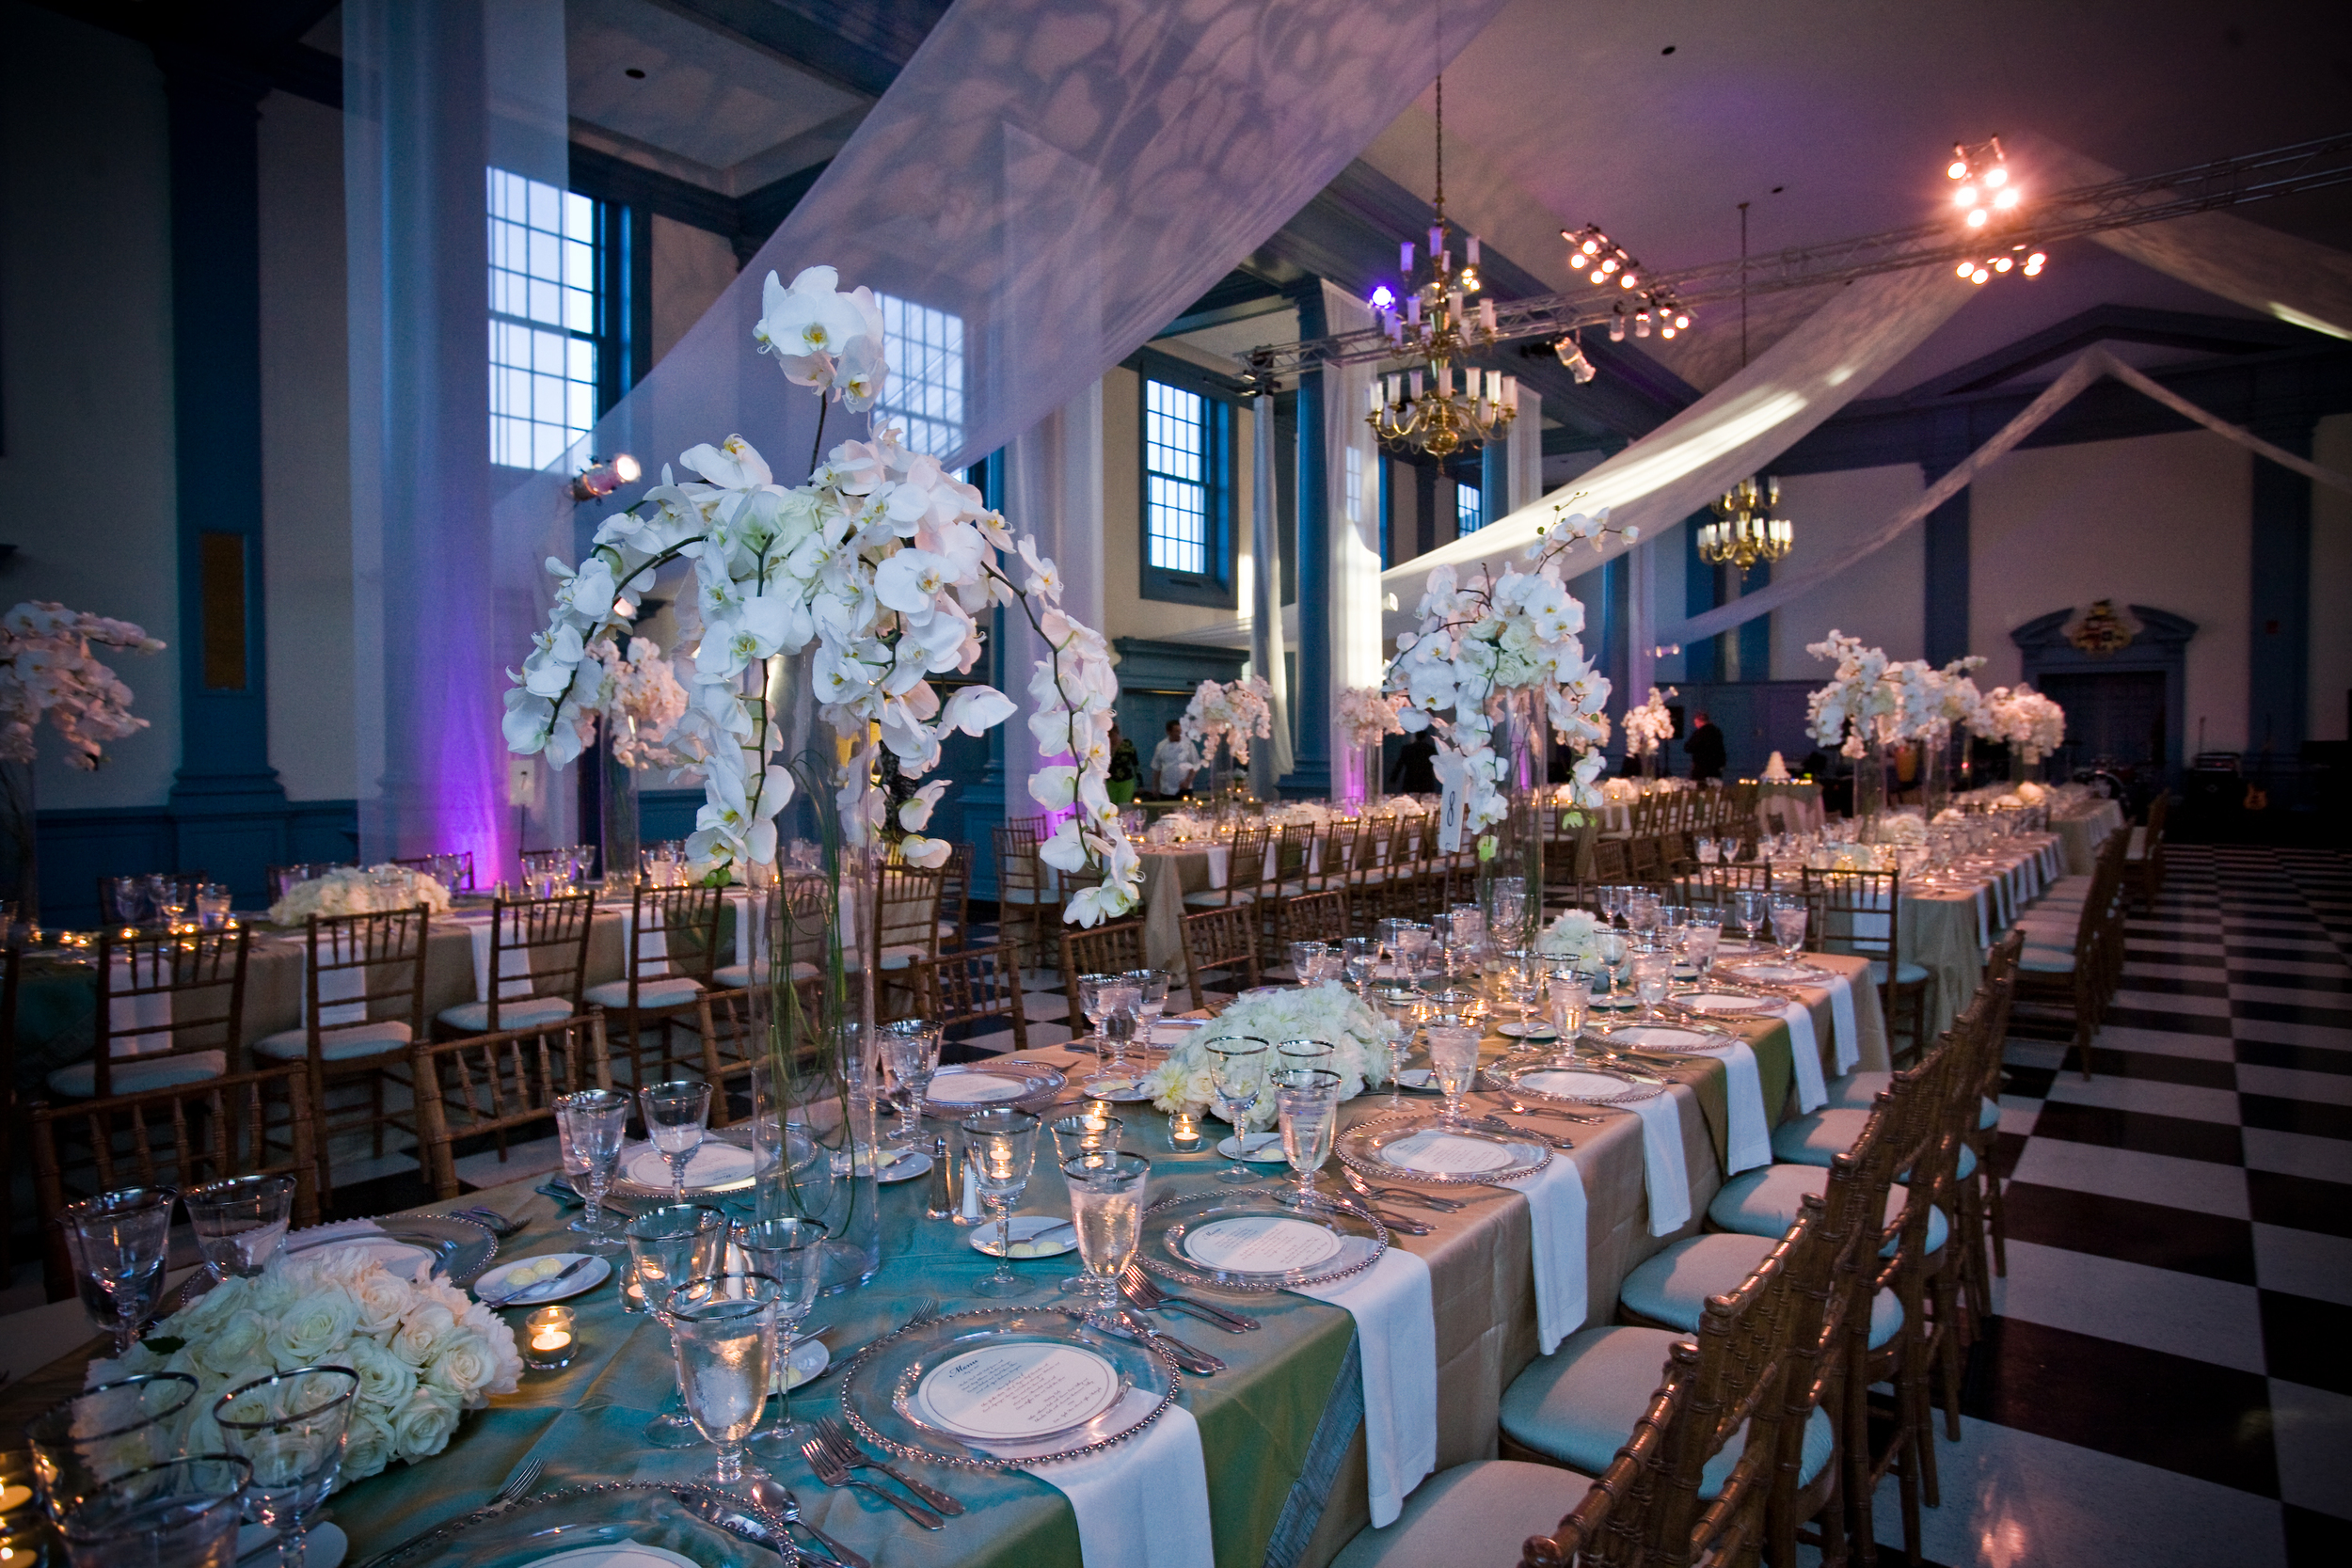 Fabric Projection - Weddings - Rentals and Staging - The AV Company